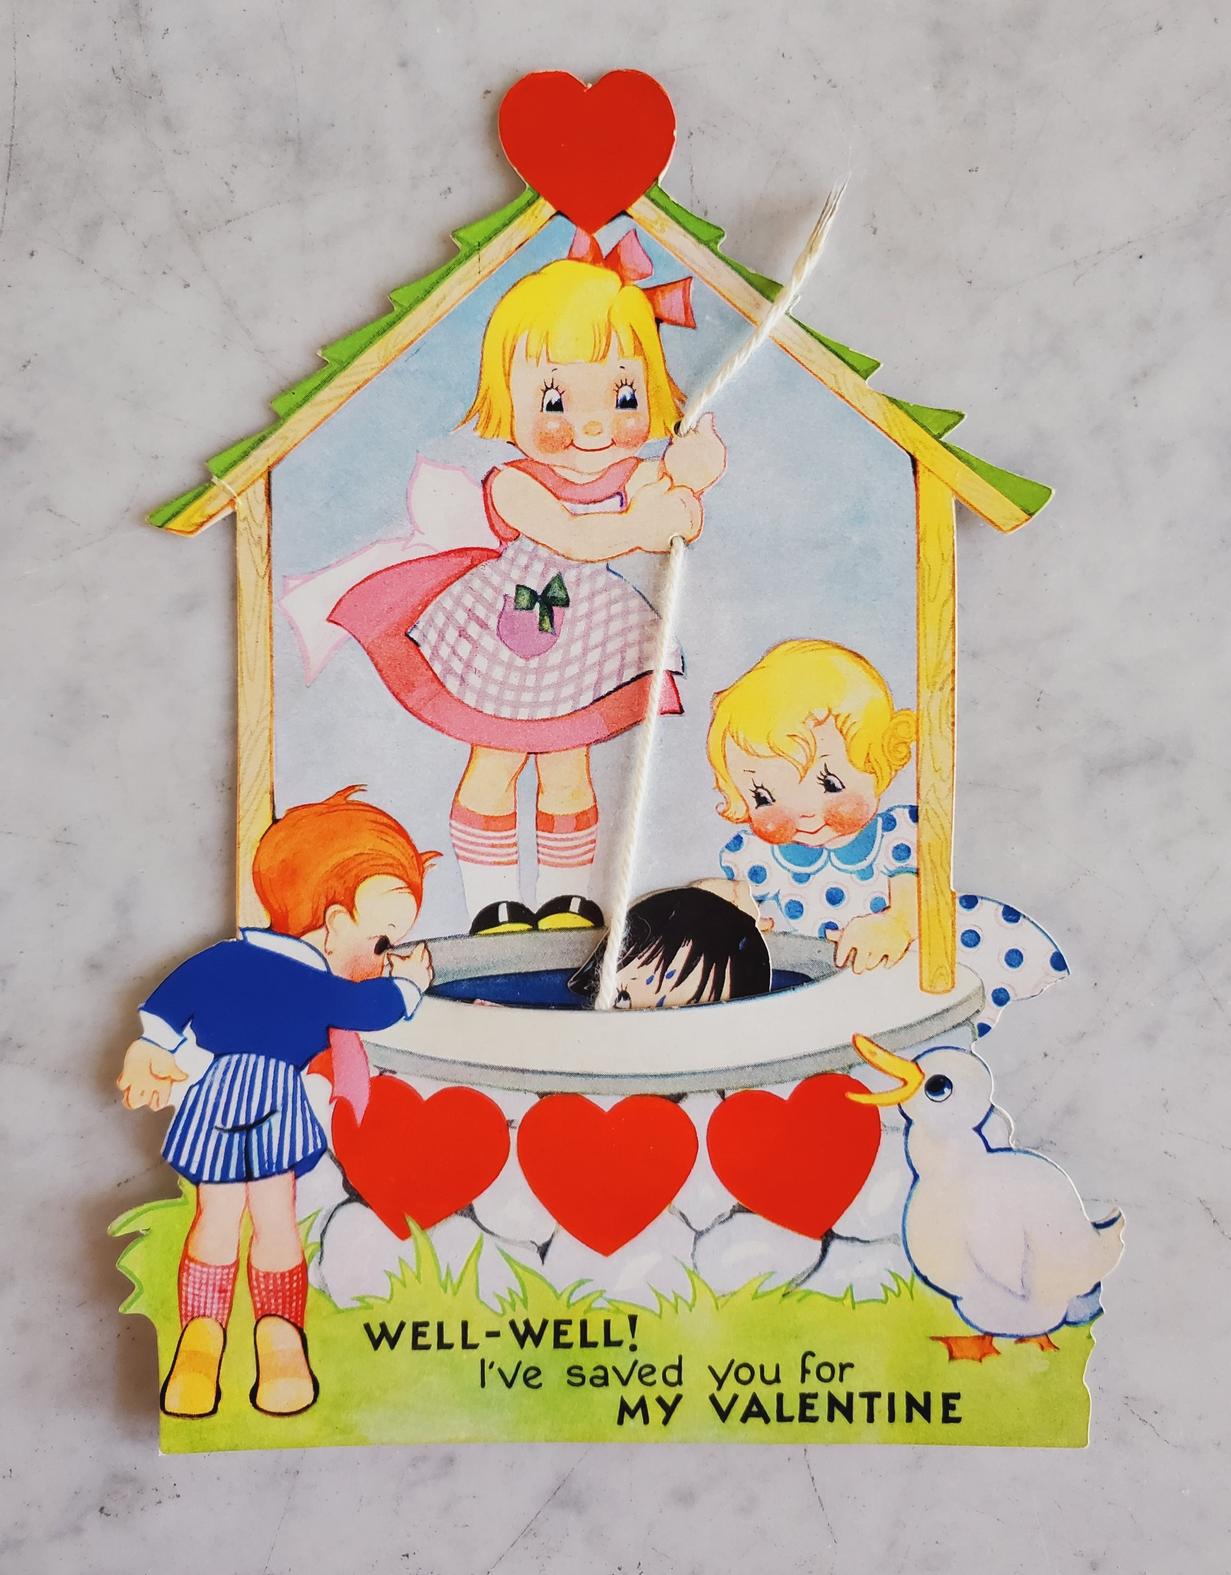 Vintage Valentine Card Mechanical Well-Well